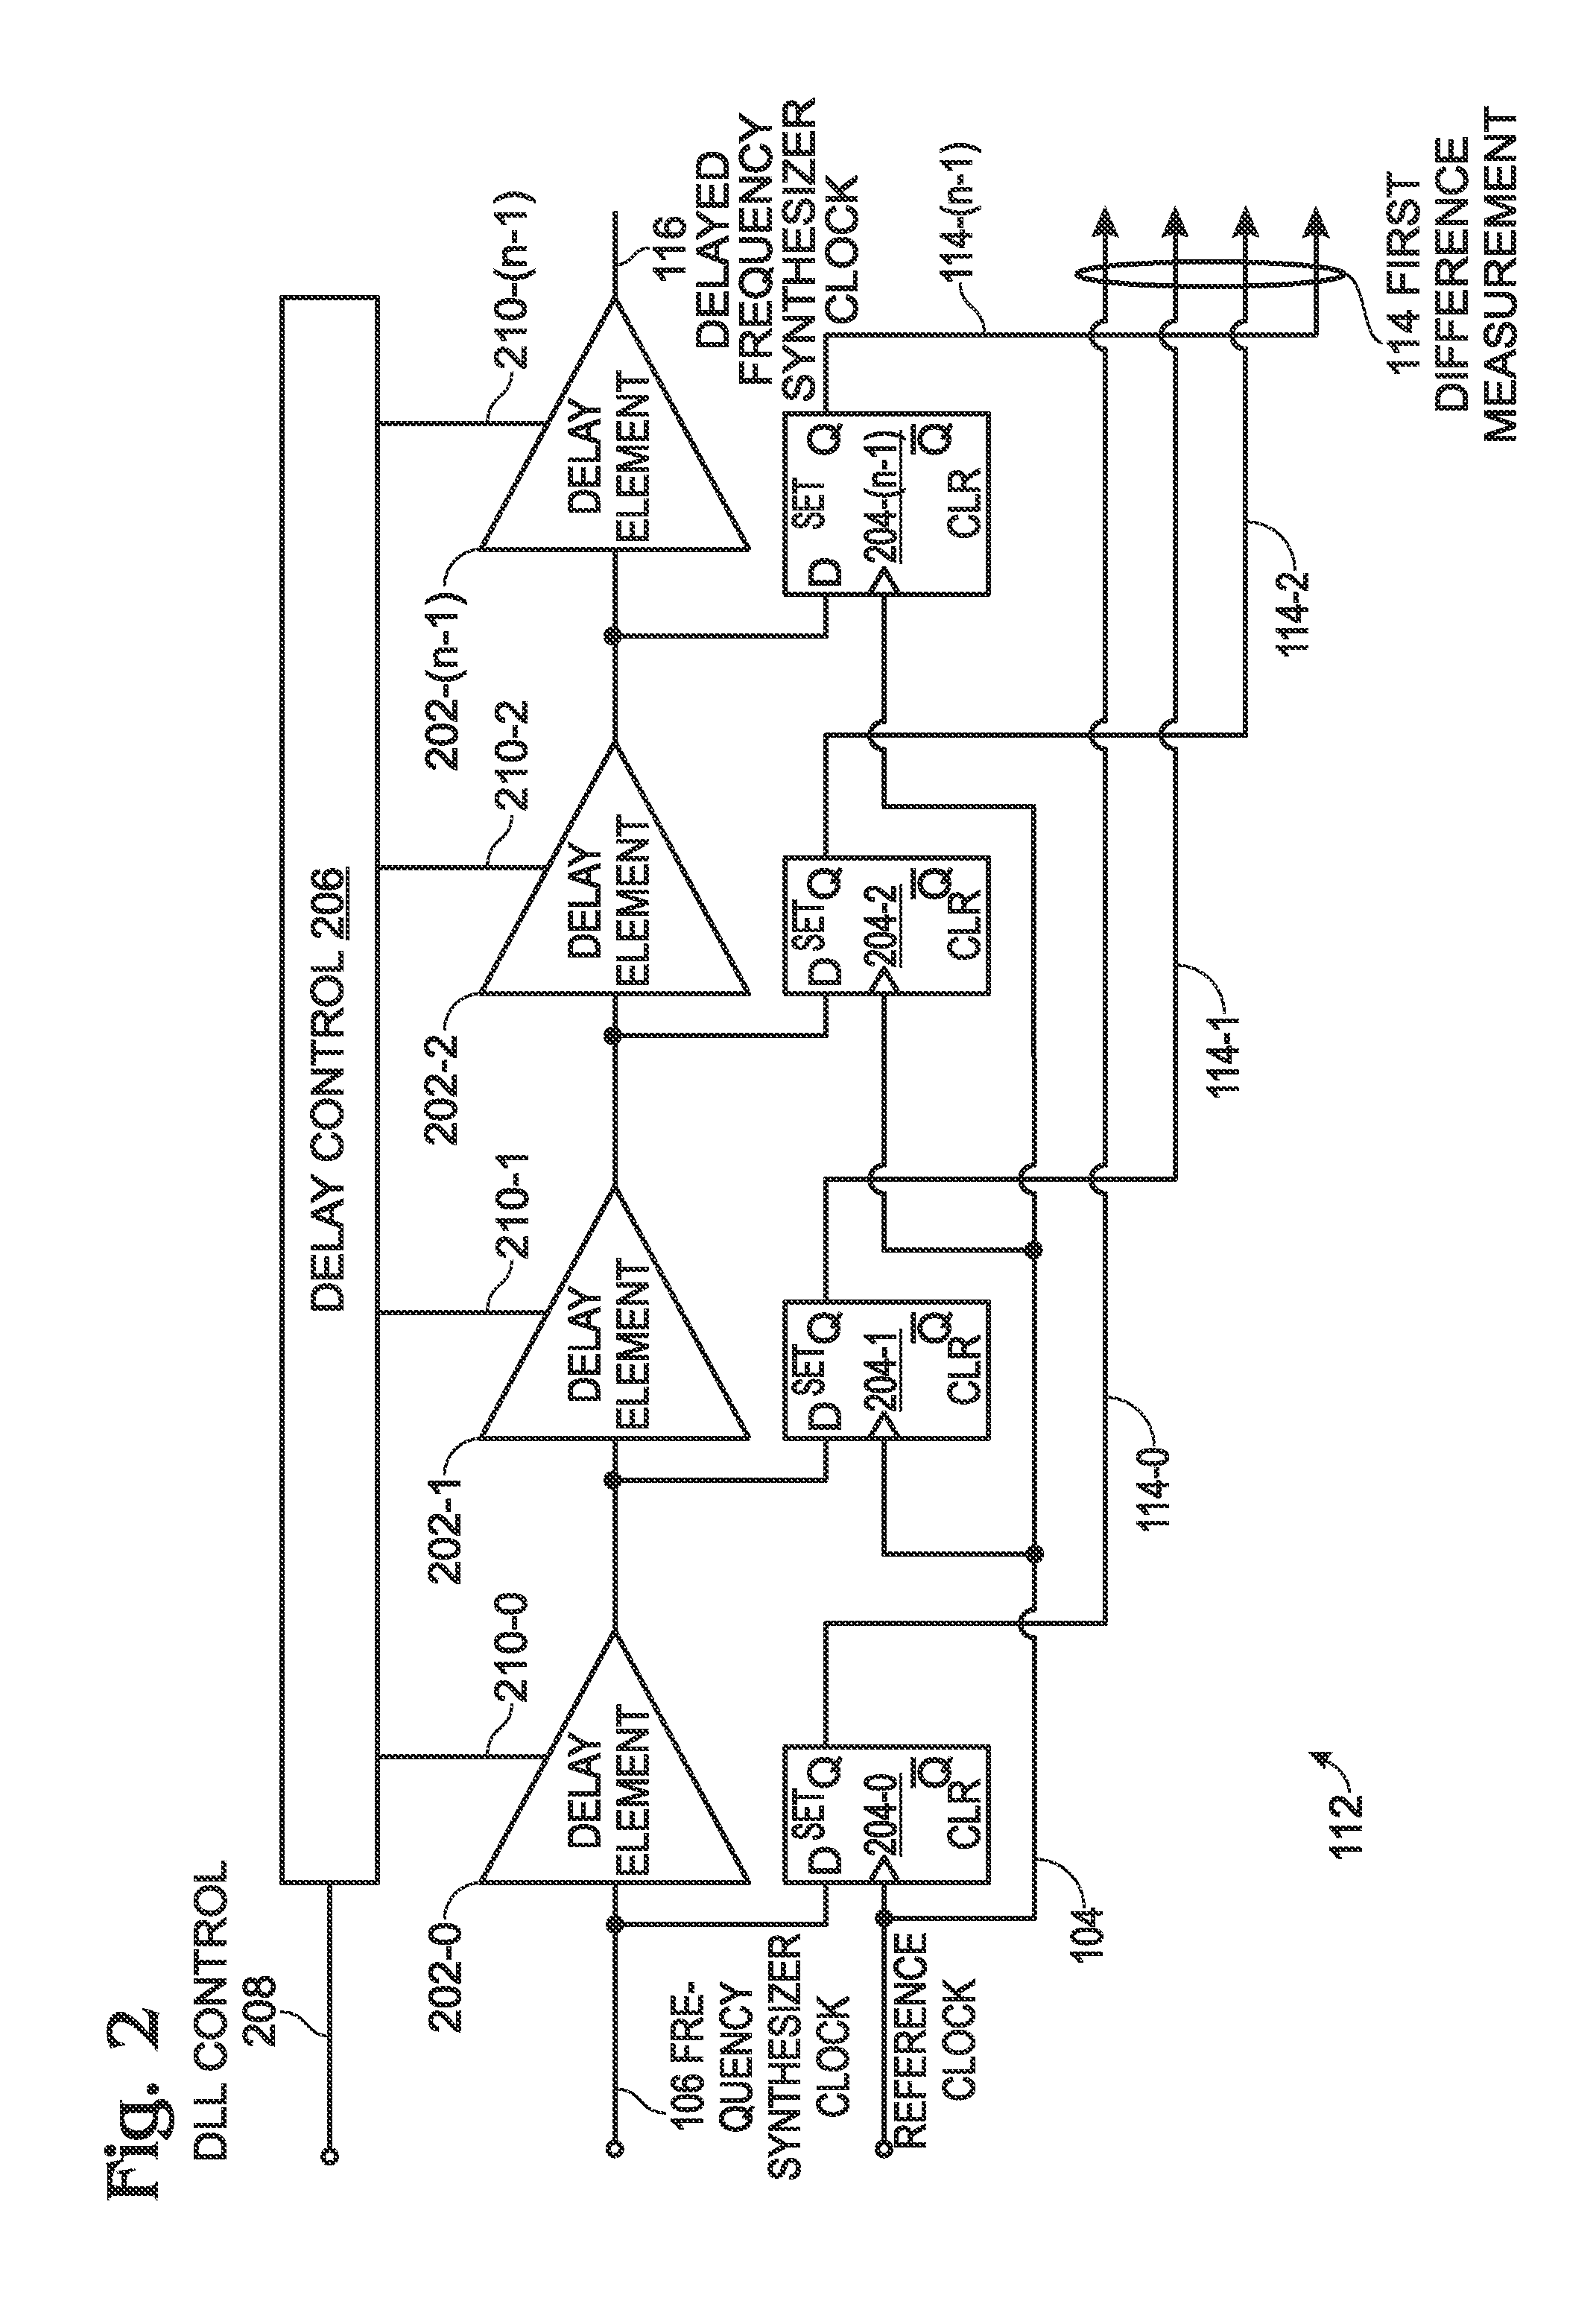 Successive time-to-digital converter for a digital phase-locked loop